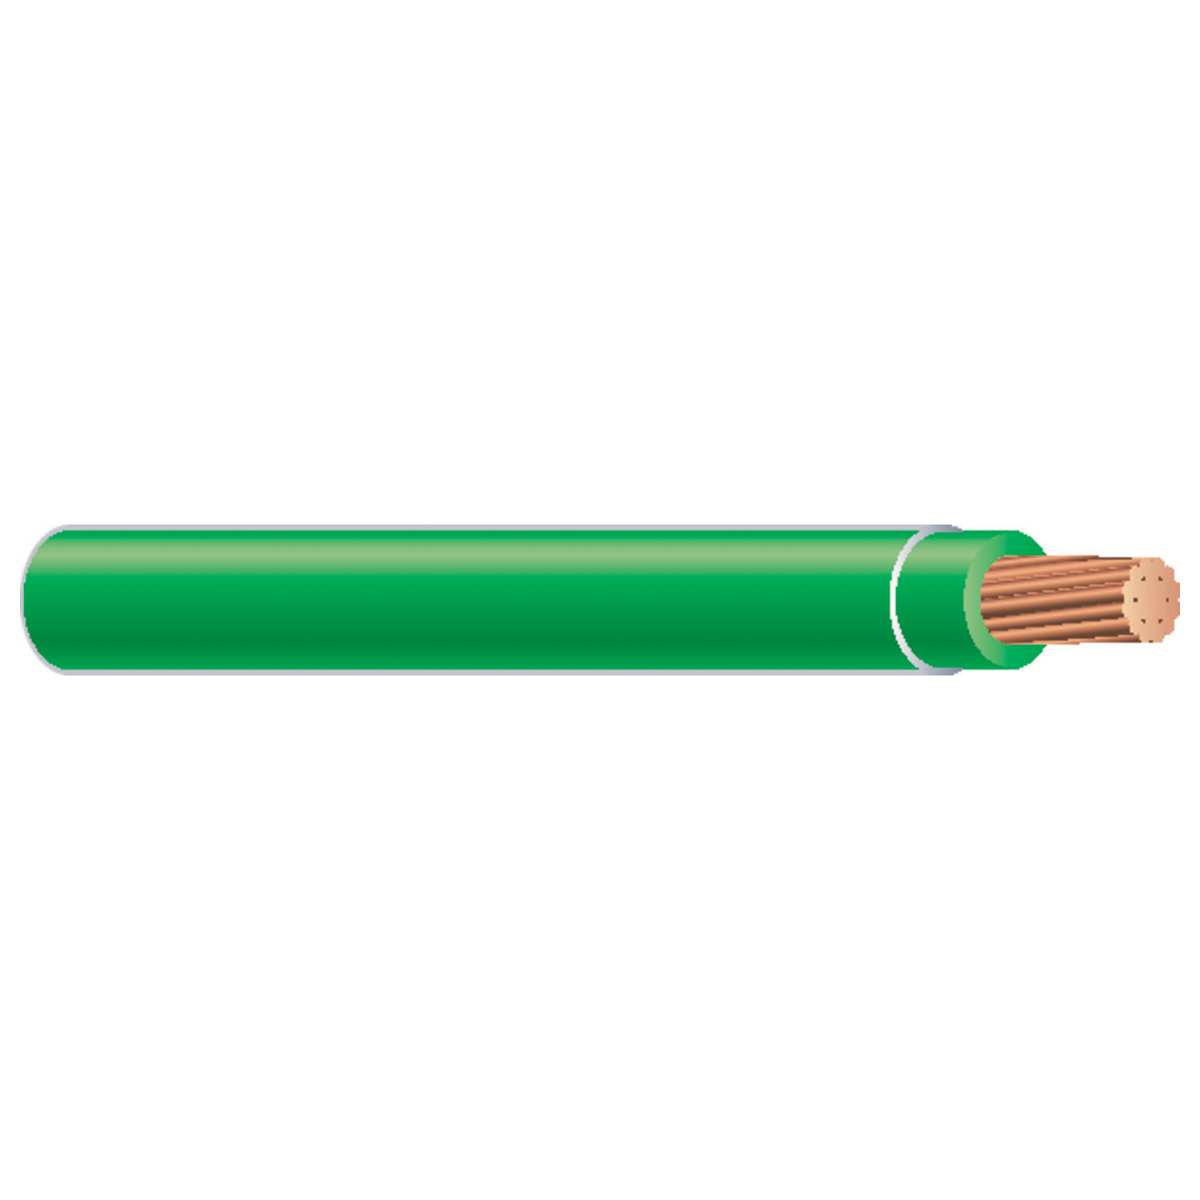 1050235 Building Wire, THHN, 12 AWG Wire, 1 -Conductor, 500 ft L, Stranded Copper Conductor, Green Nylon Sheath